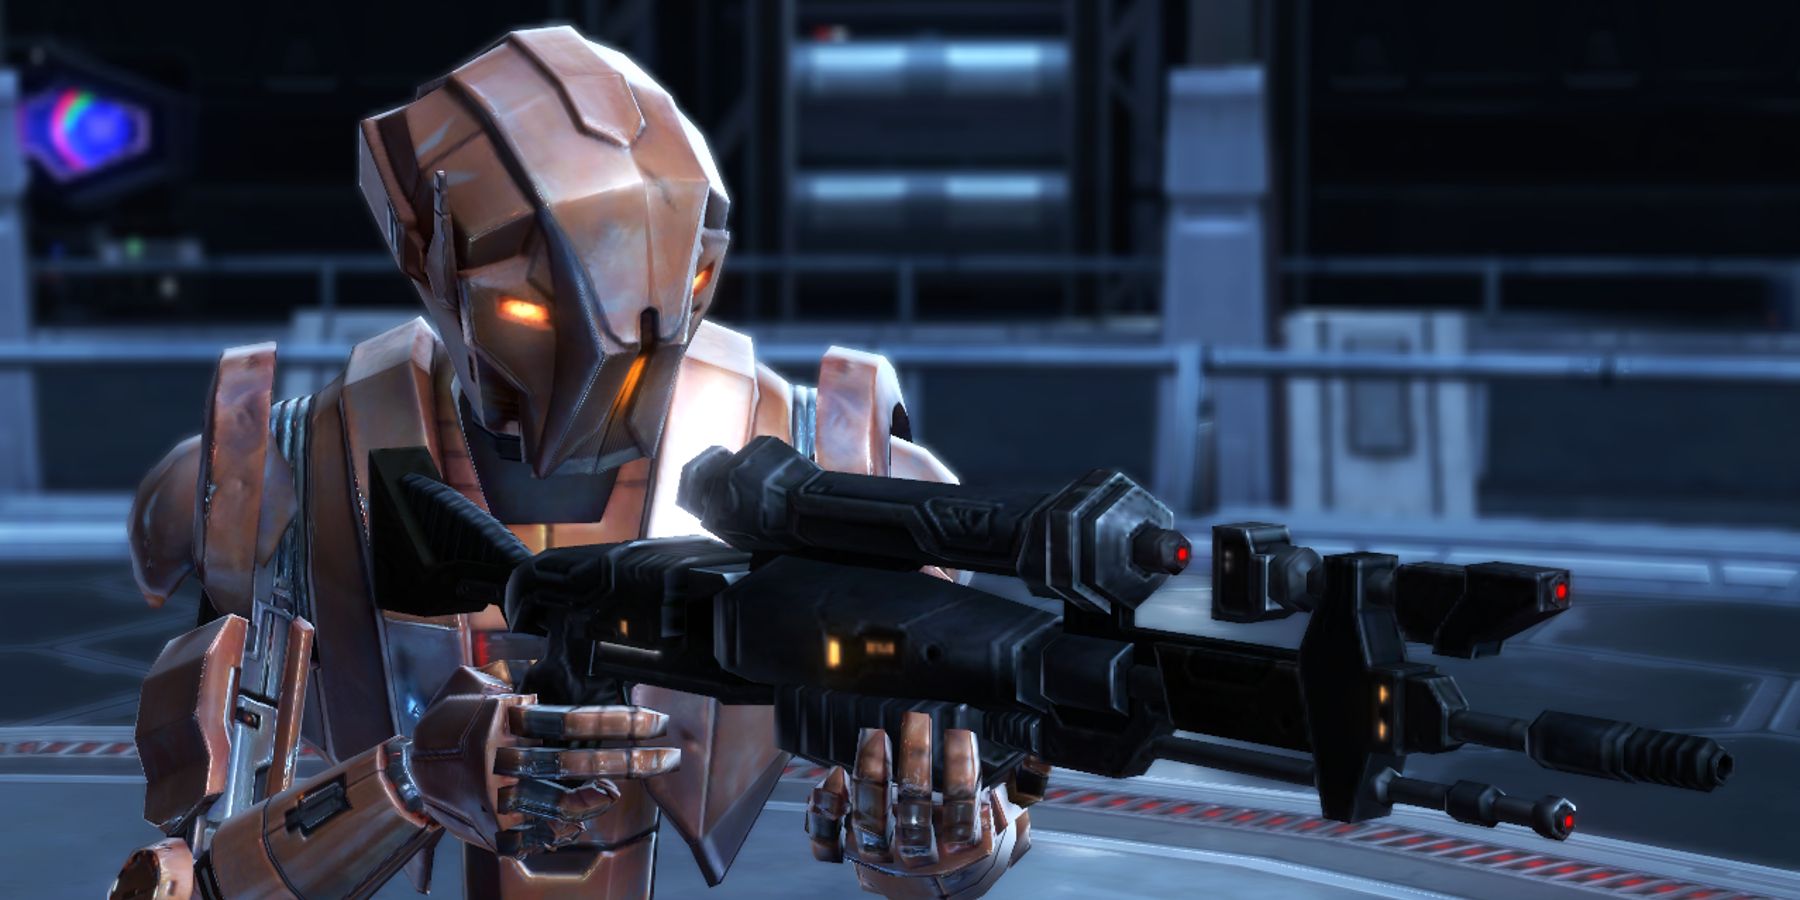 HK-47 aiming his blaster rifle in Star Wars Knights Of The Old Republic